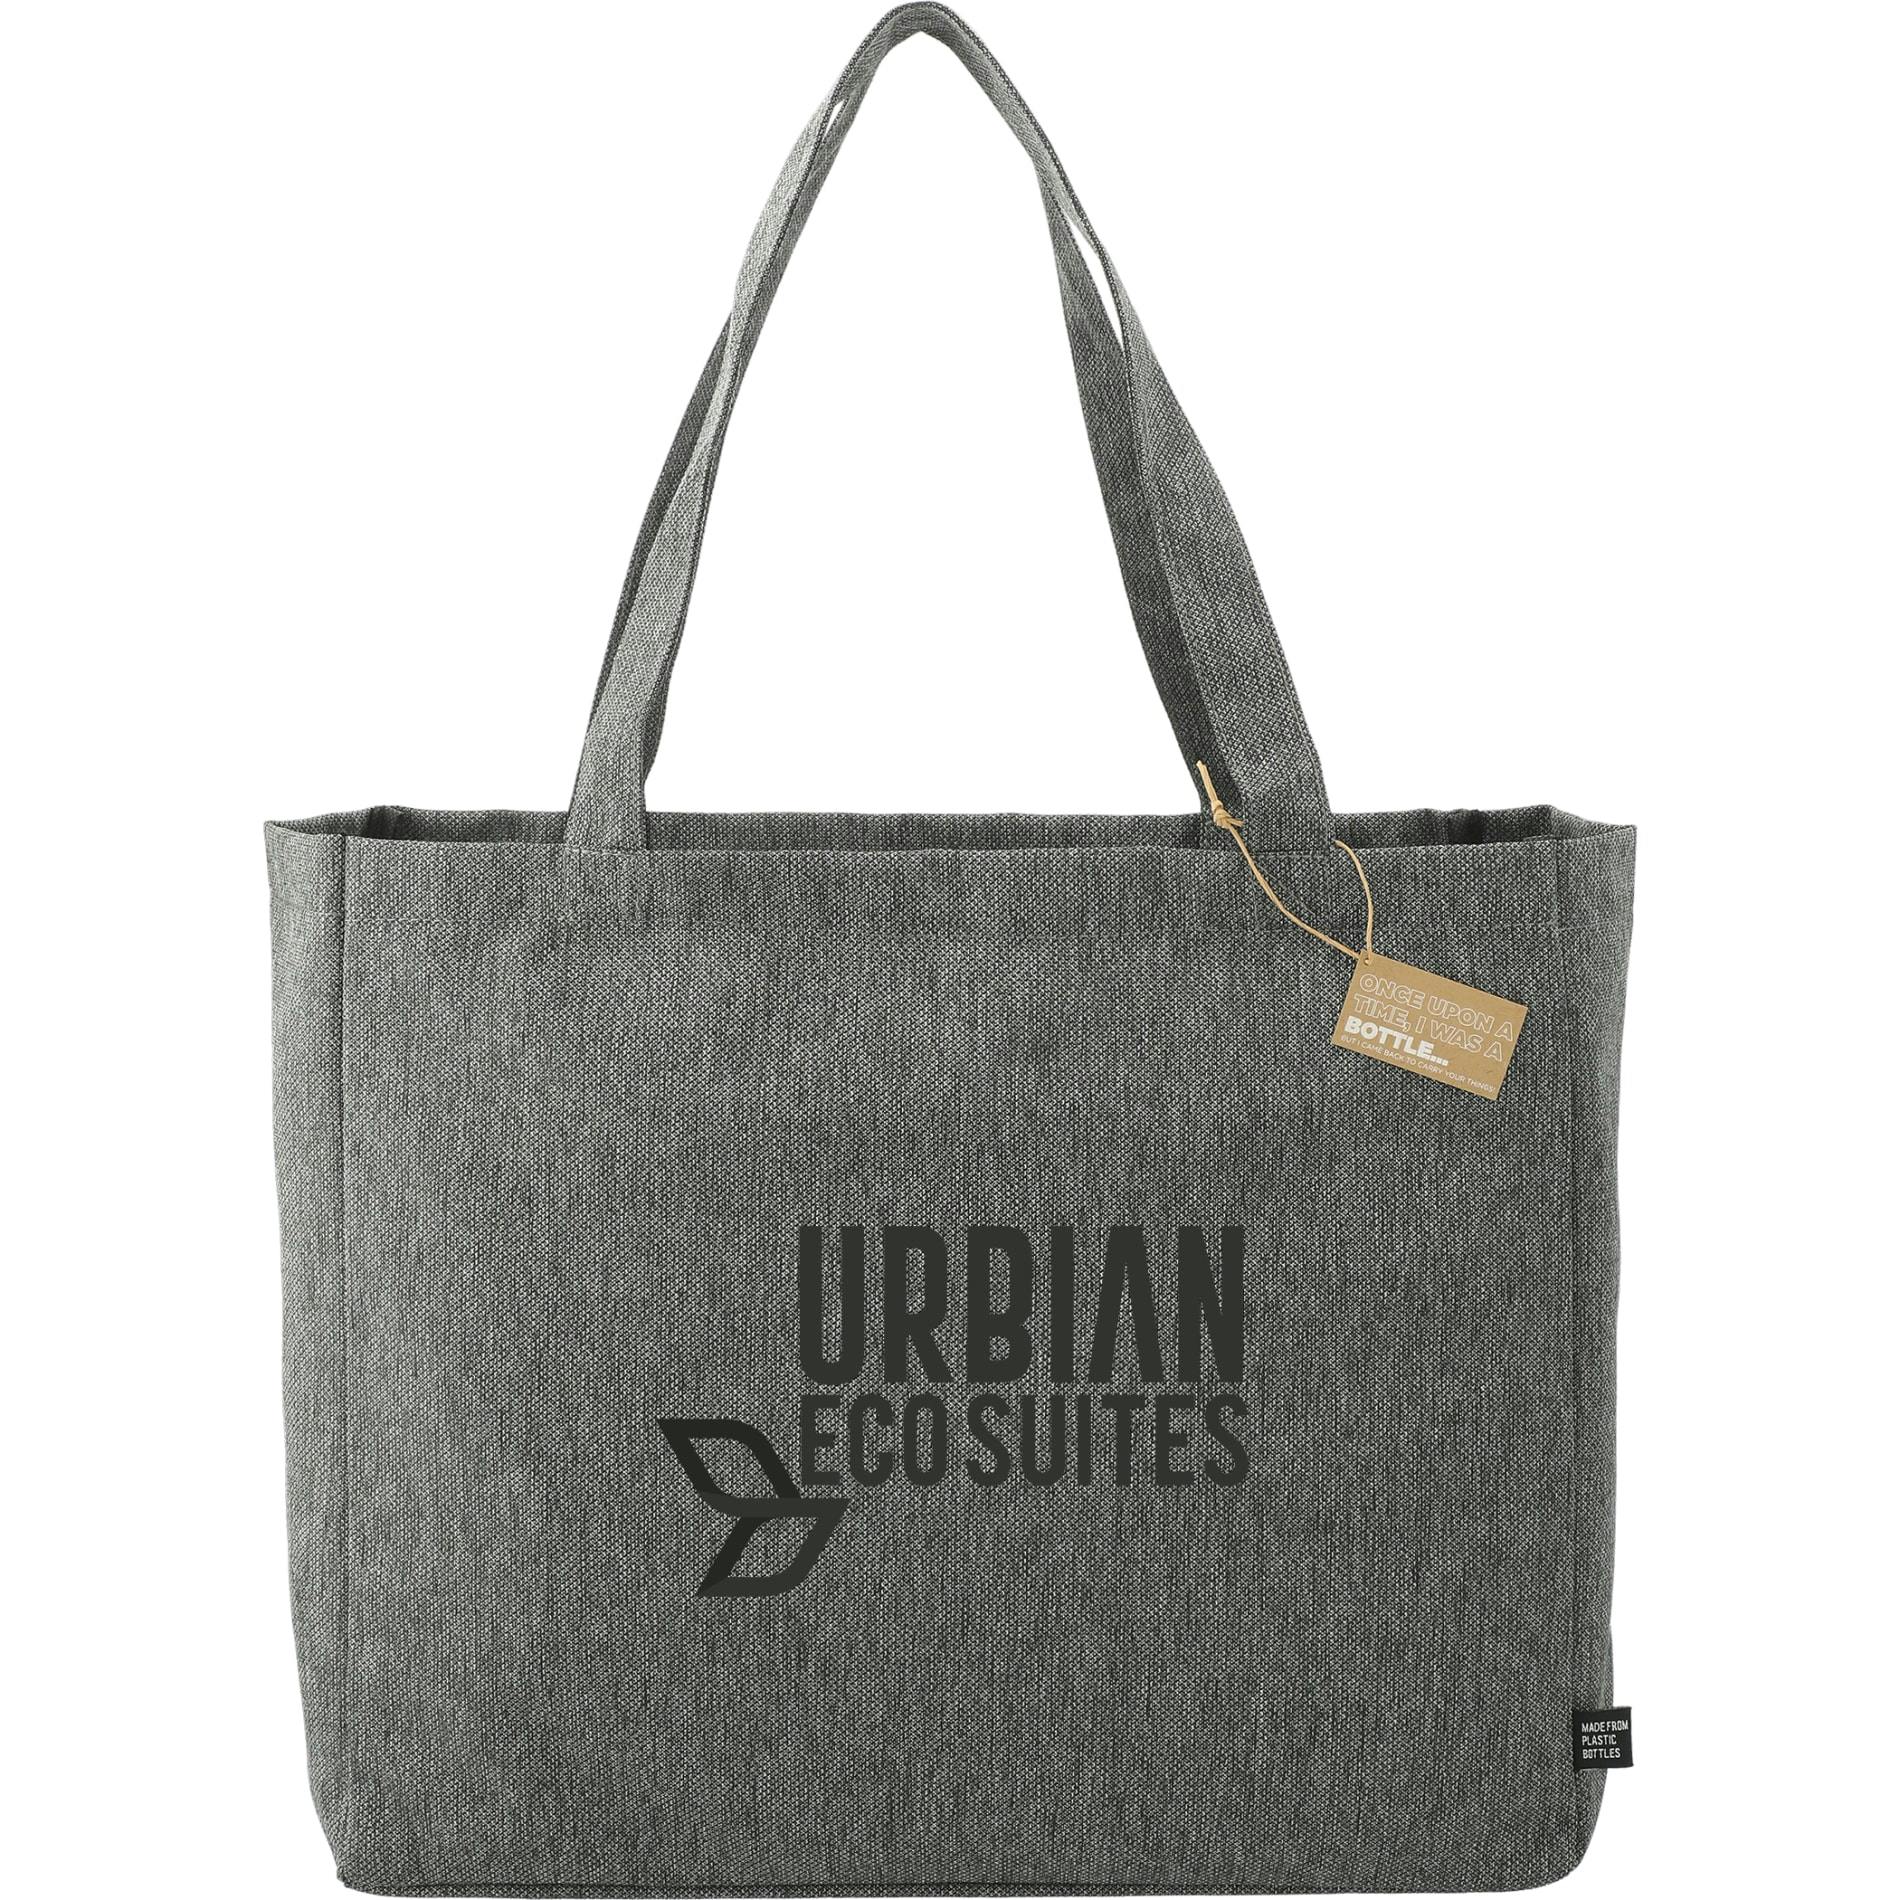 Vila Recycled All-Purpose Tote - additional Image 3